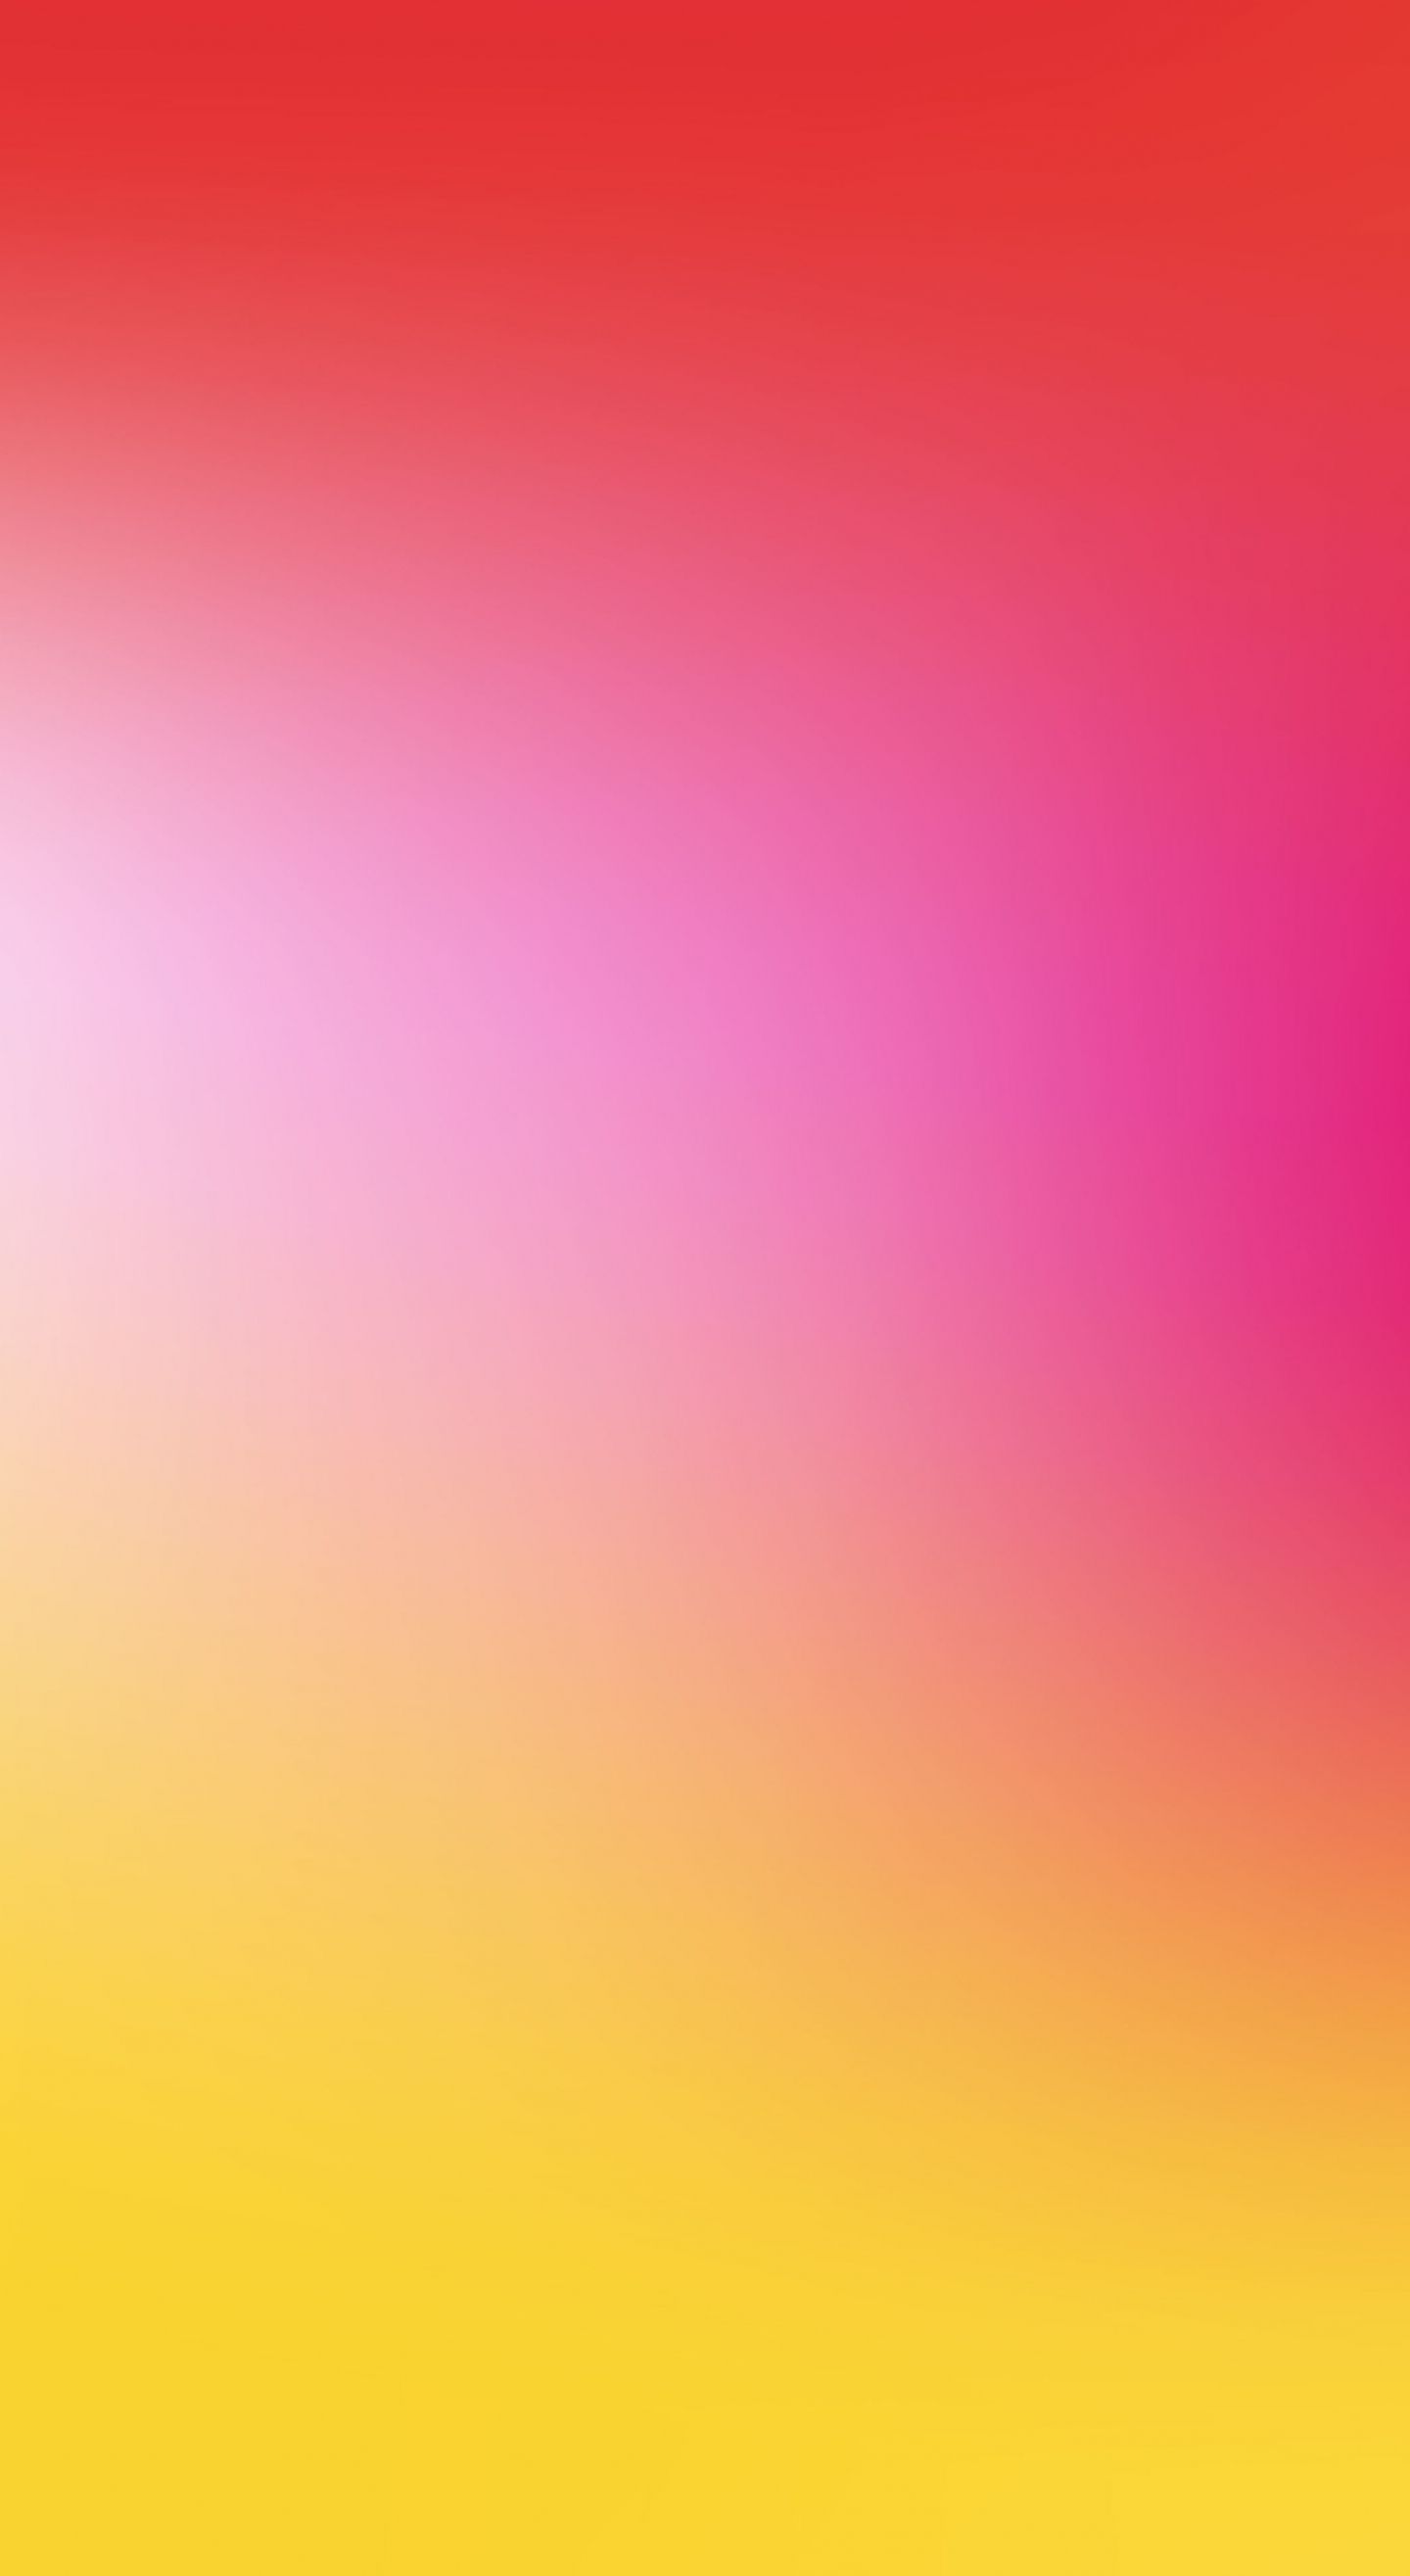 Download 1440x2630 wallpaper gradient, yellow and pink colors, abstract, samsung galaxy note 1440x2630 HD image, background, 9317